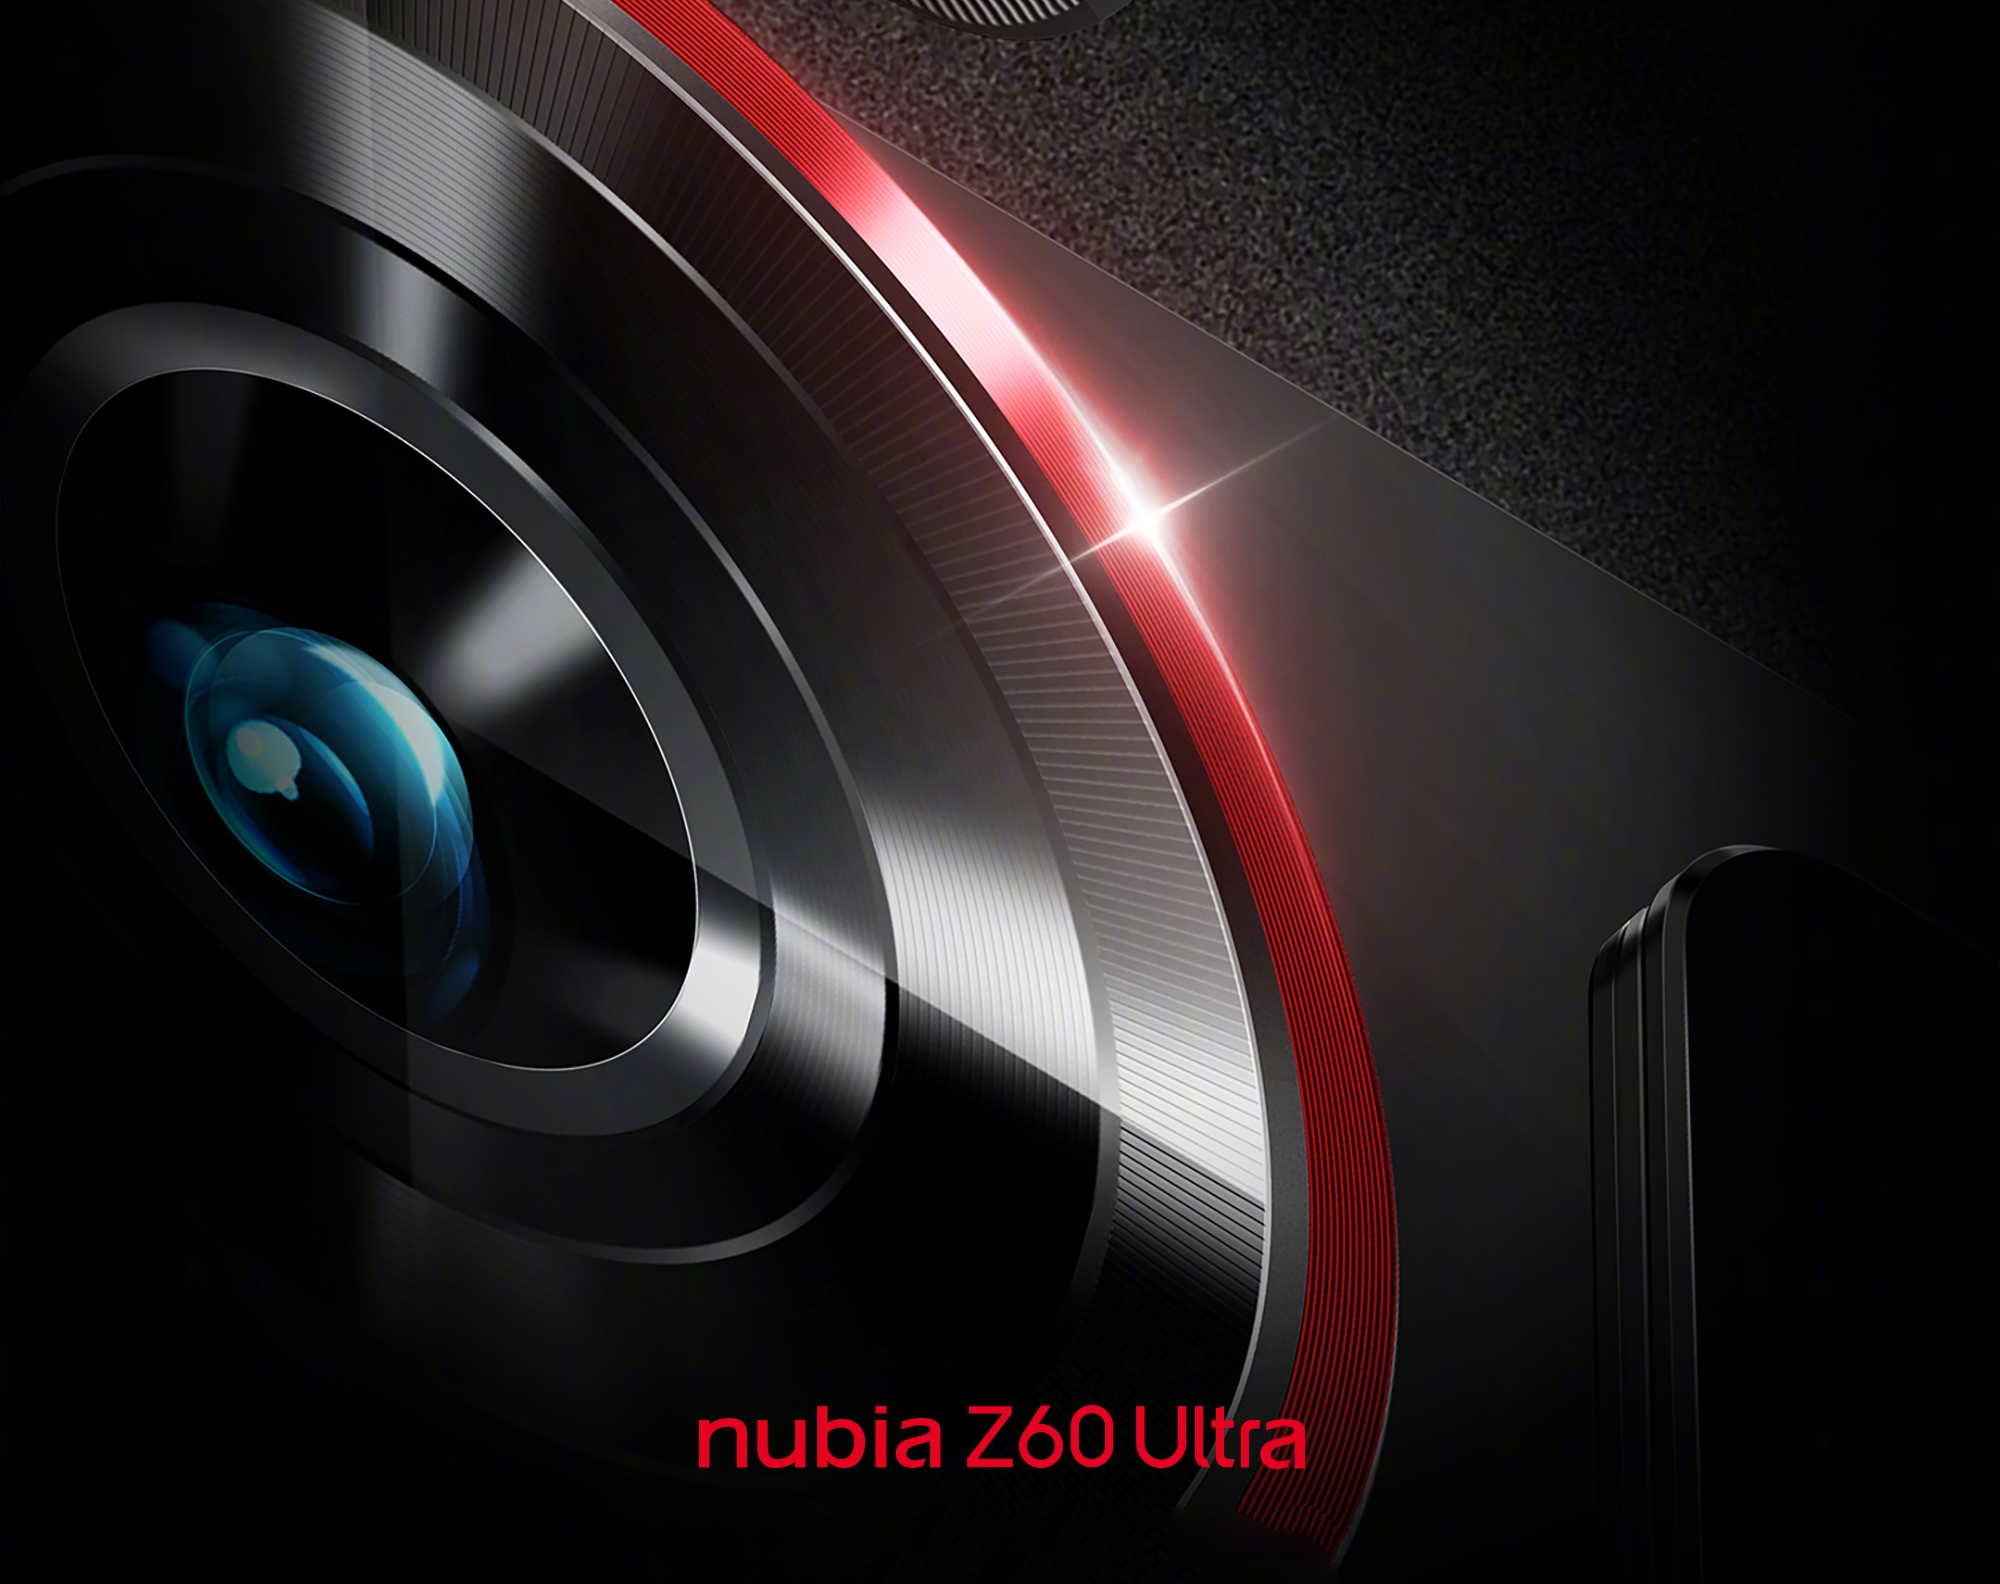 ZTE has revealed the camera specs of the Nubia Z60 Ultra flagship